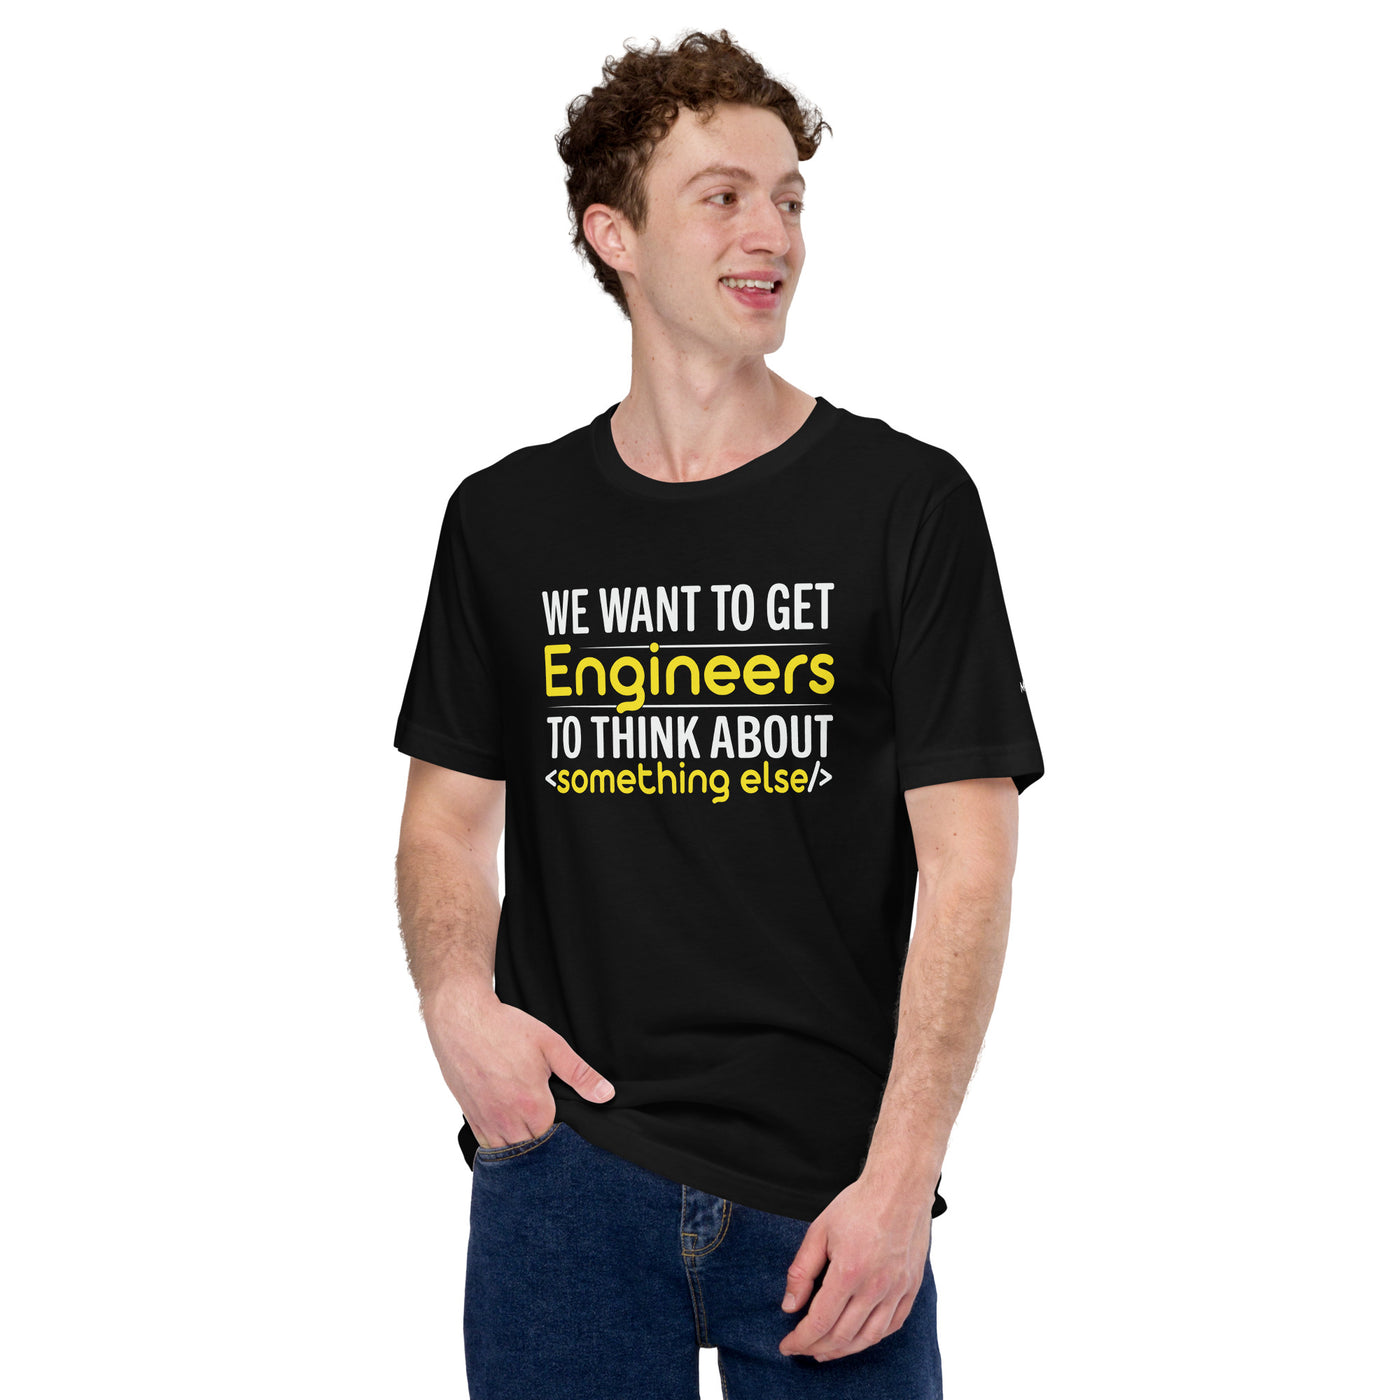 We want to get Engineers to think about something else Unisex t-shirt